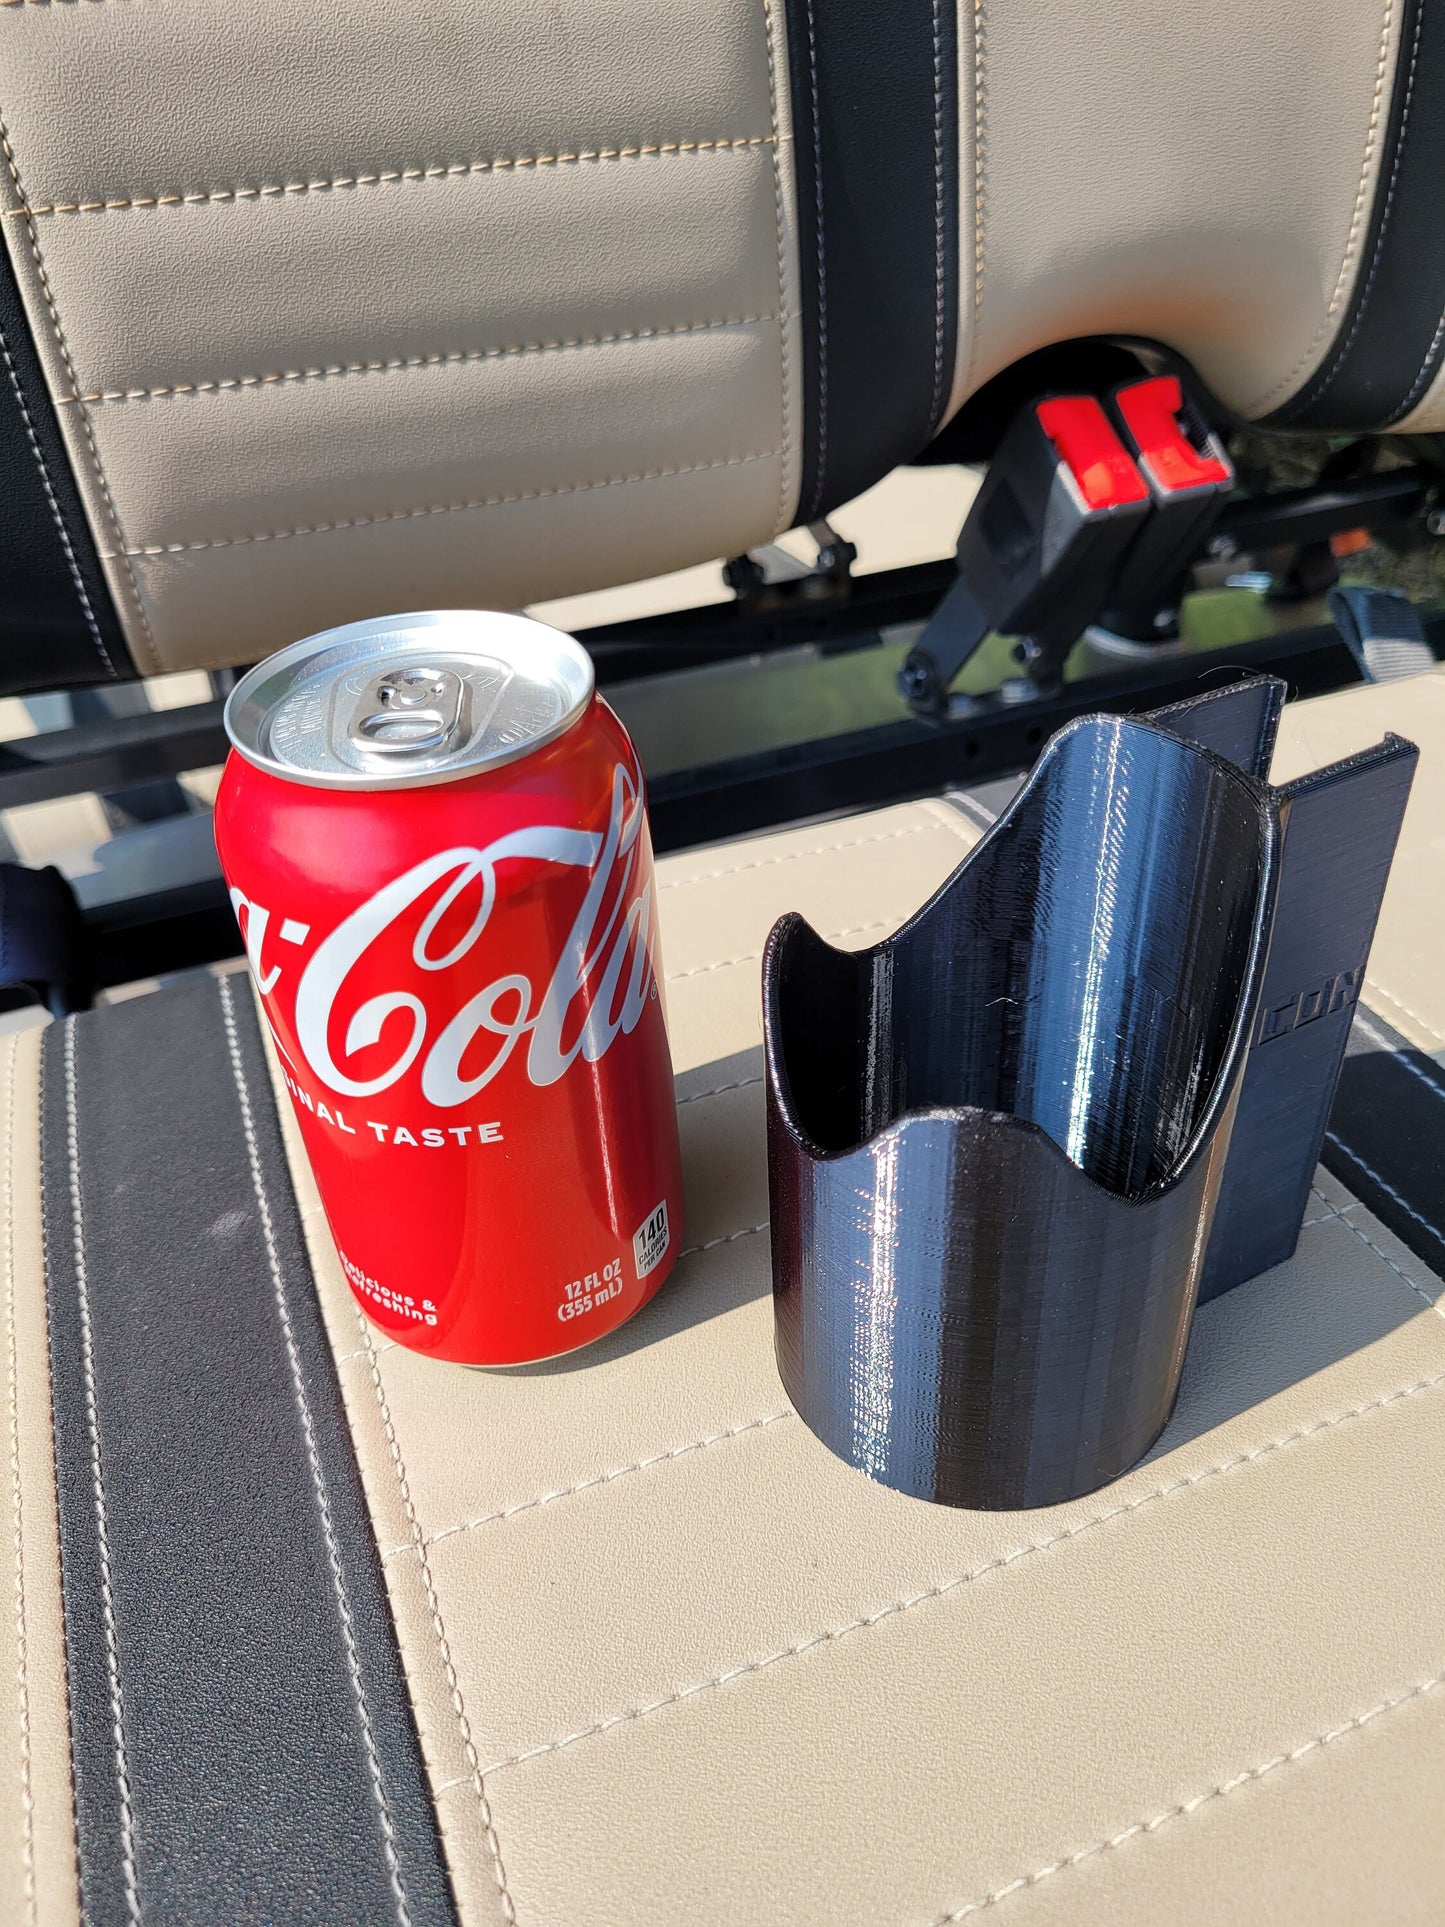 Soda Can Holder for Golf Cart Windshield Bar Clips to Front Strut Multiple Sizes Easy Add Cupholder